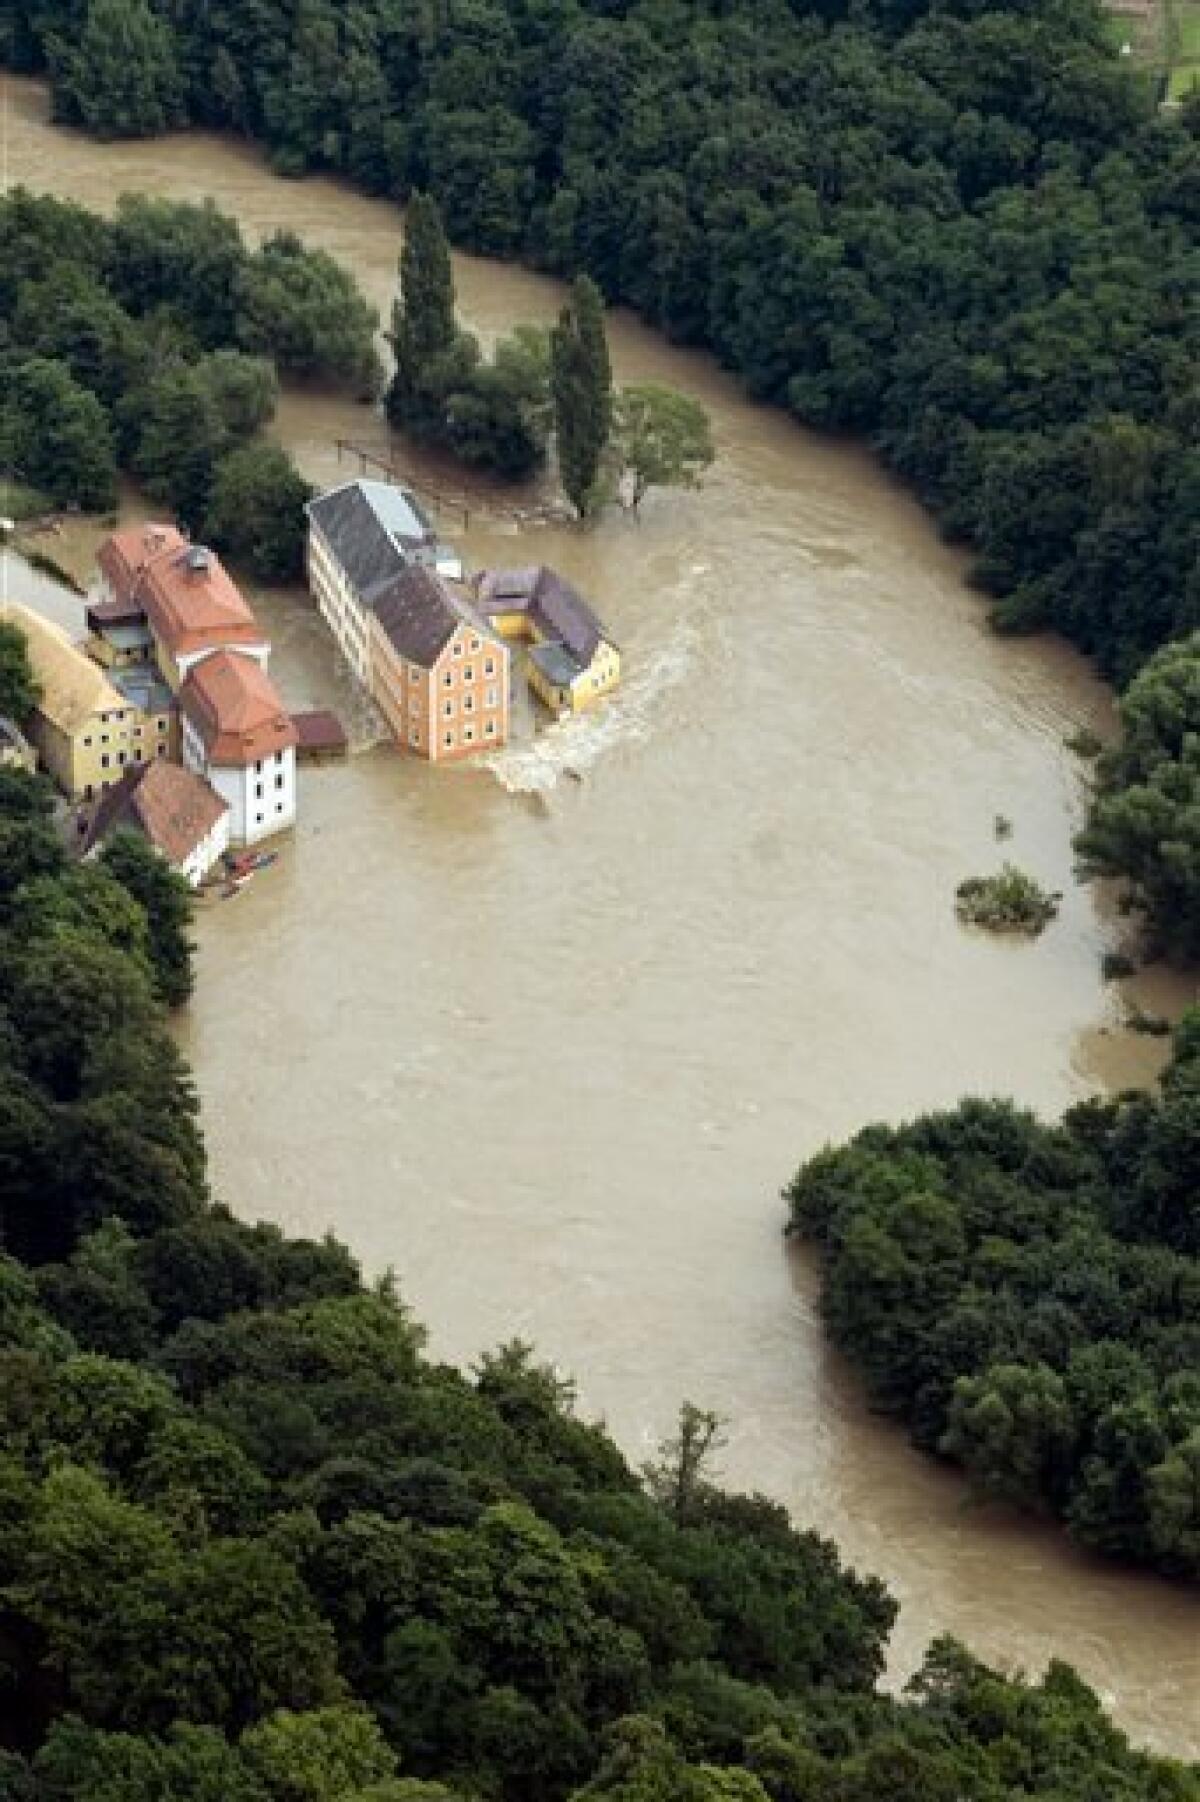 An aerial view of Neisse river near Goerlitz, Eastern Germany, photographed on Sunday Aug. 8, 2010. The flooding in central Europe has struck an area near the borders of Poland, Germany and the Czech Republic. (AP Photo/ddp/ Jens Schlueter)